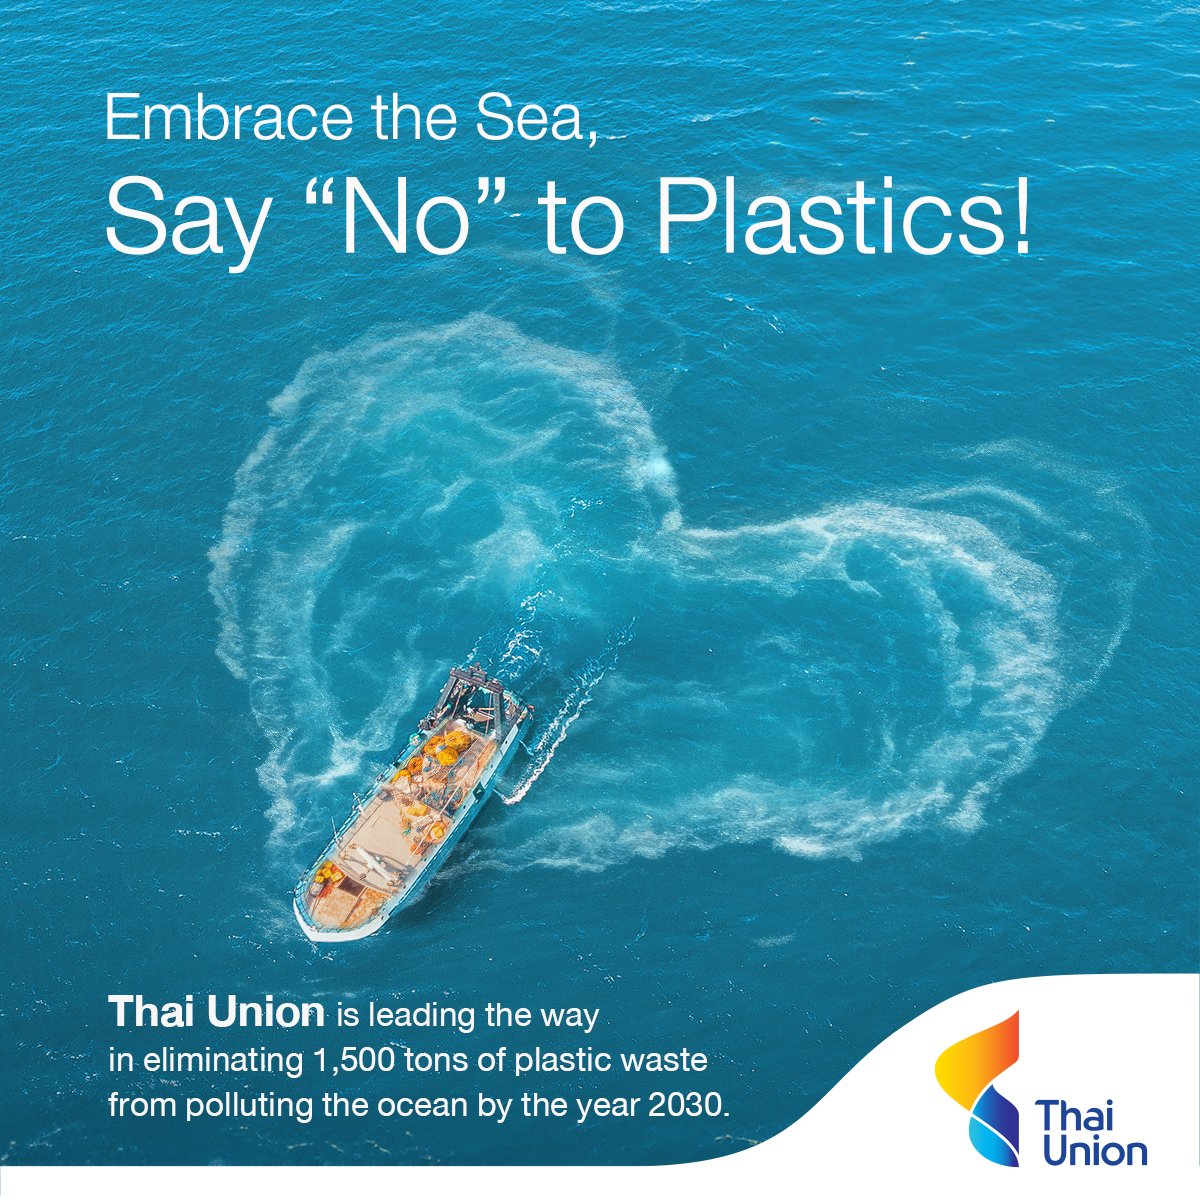 Thai Union is taking a significant step forward with our SeaChange® 2030 sustainability strategy, leading the charge in addressing ocean-bound plastic pollution head-on. We're dedicated to safeguarding our oceans for future generations. 🌊 #Thaiunion #HealthyLivingHealthyOceans